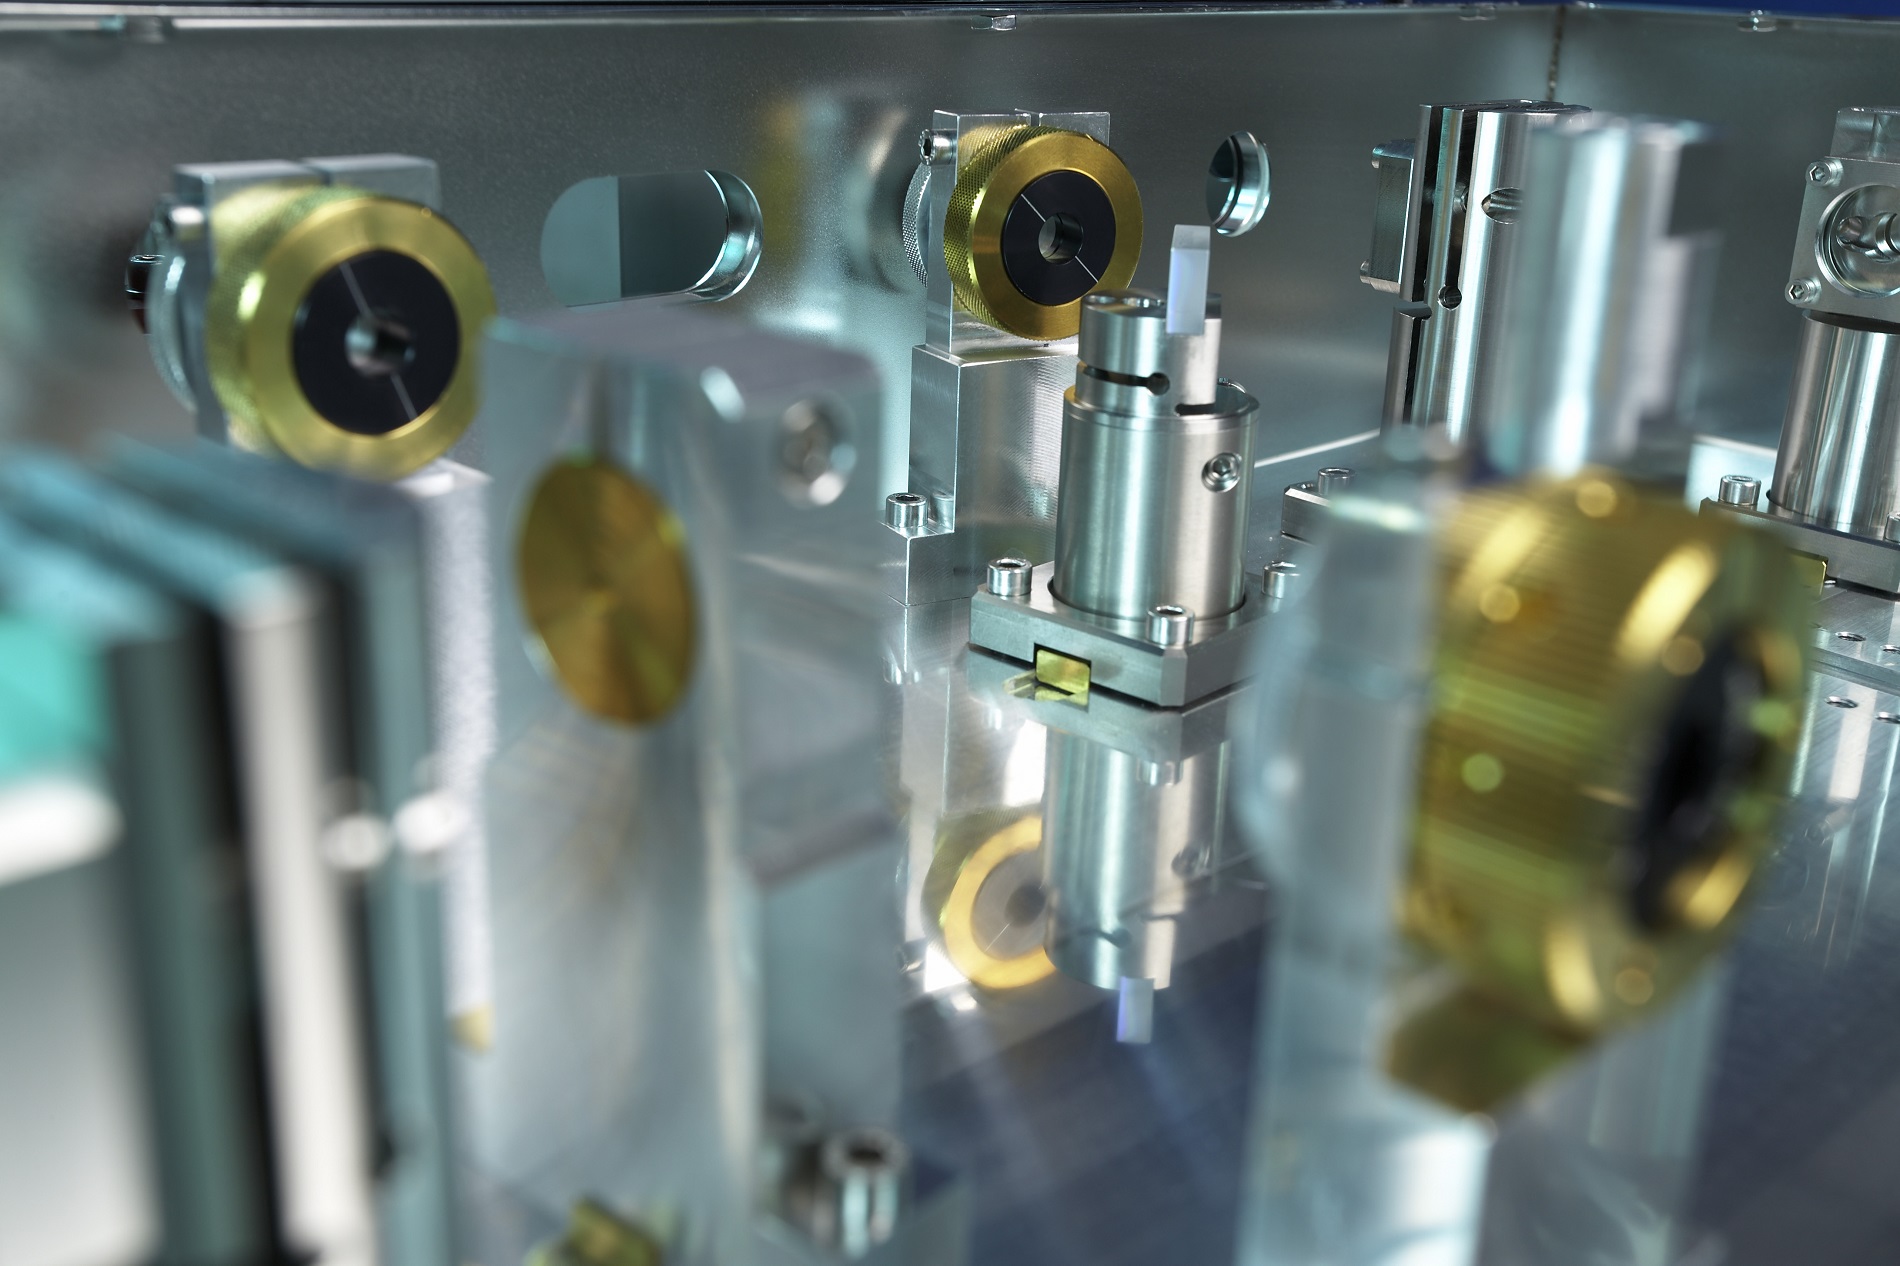 A glimpse inside an ultra-short pulse laser from TRUMPF’s TruMicro range